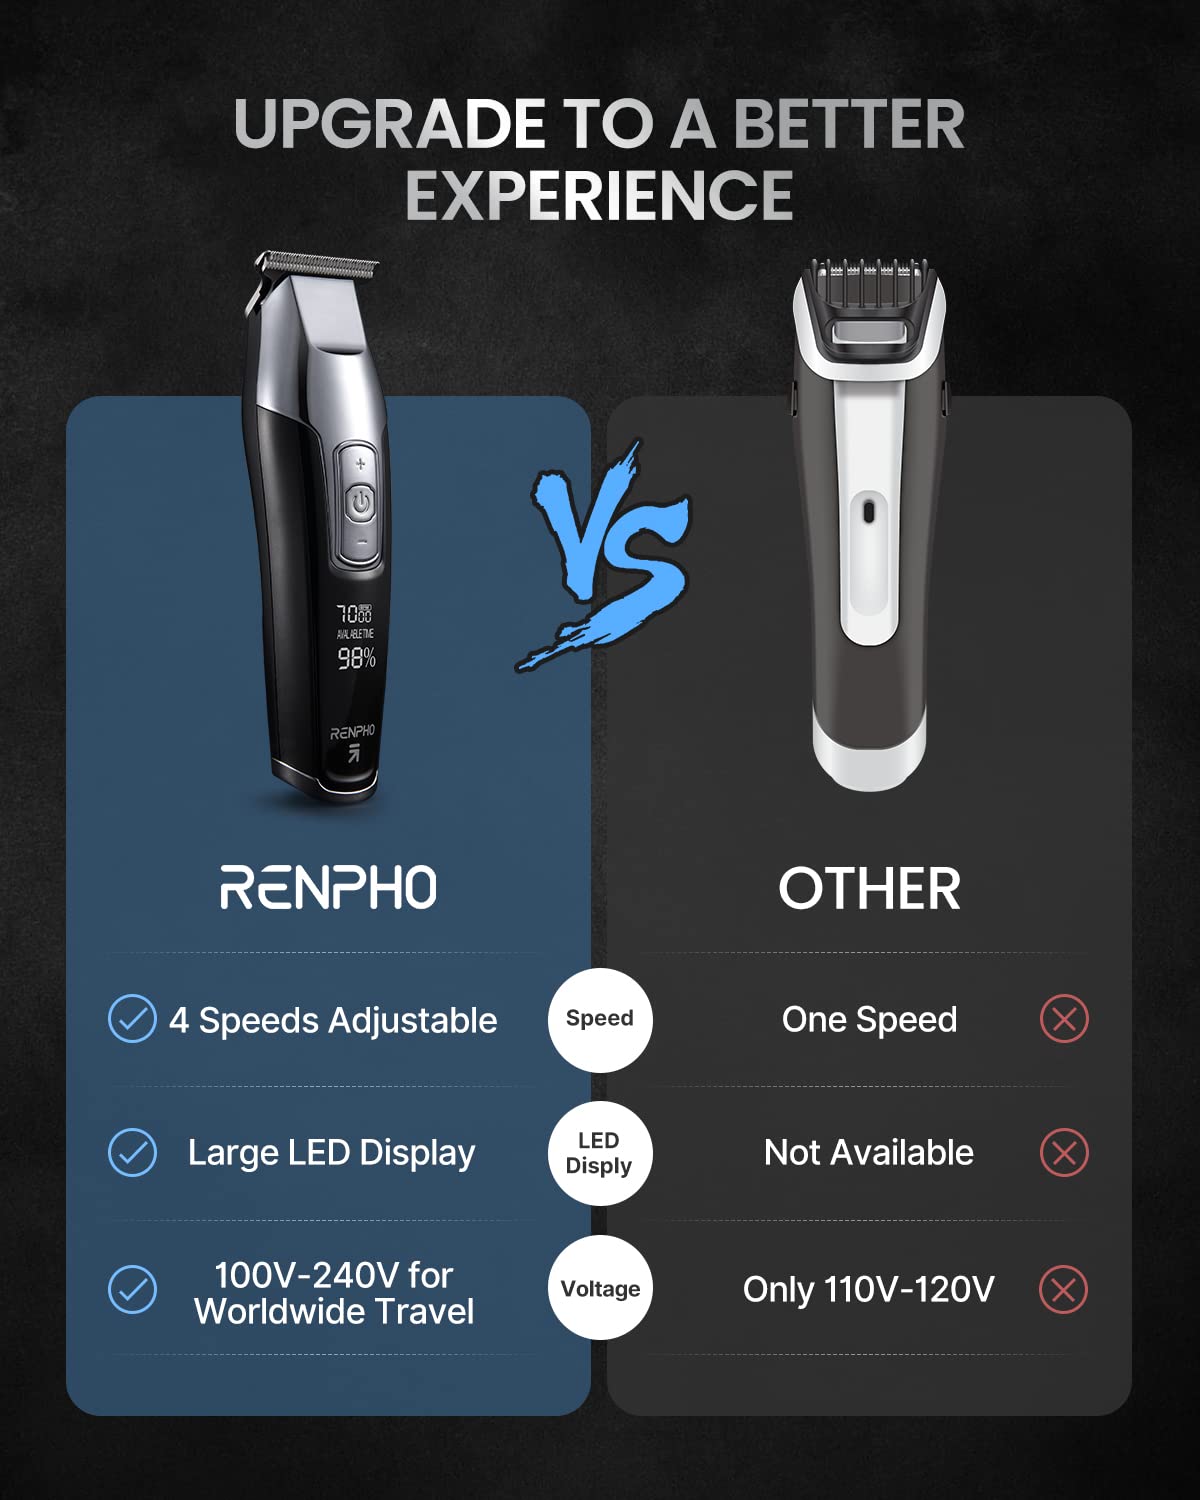 RENPHO 4-Speed Trimmer for Men, Cordless Hair Clippers Set, T Blade Beard Trimmer for Men Professional, Barber Clippers with LED Display & Precise Length Settings, 100-240V for Worldwide Travel